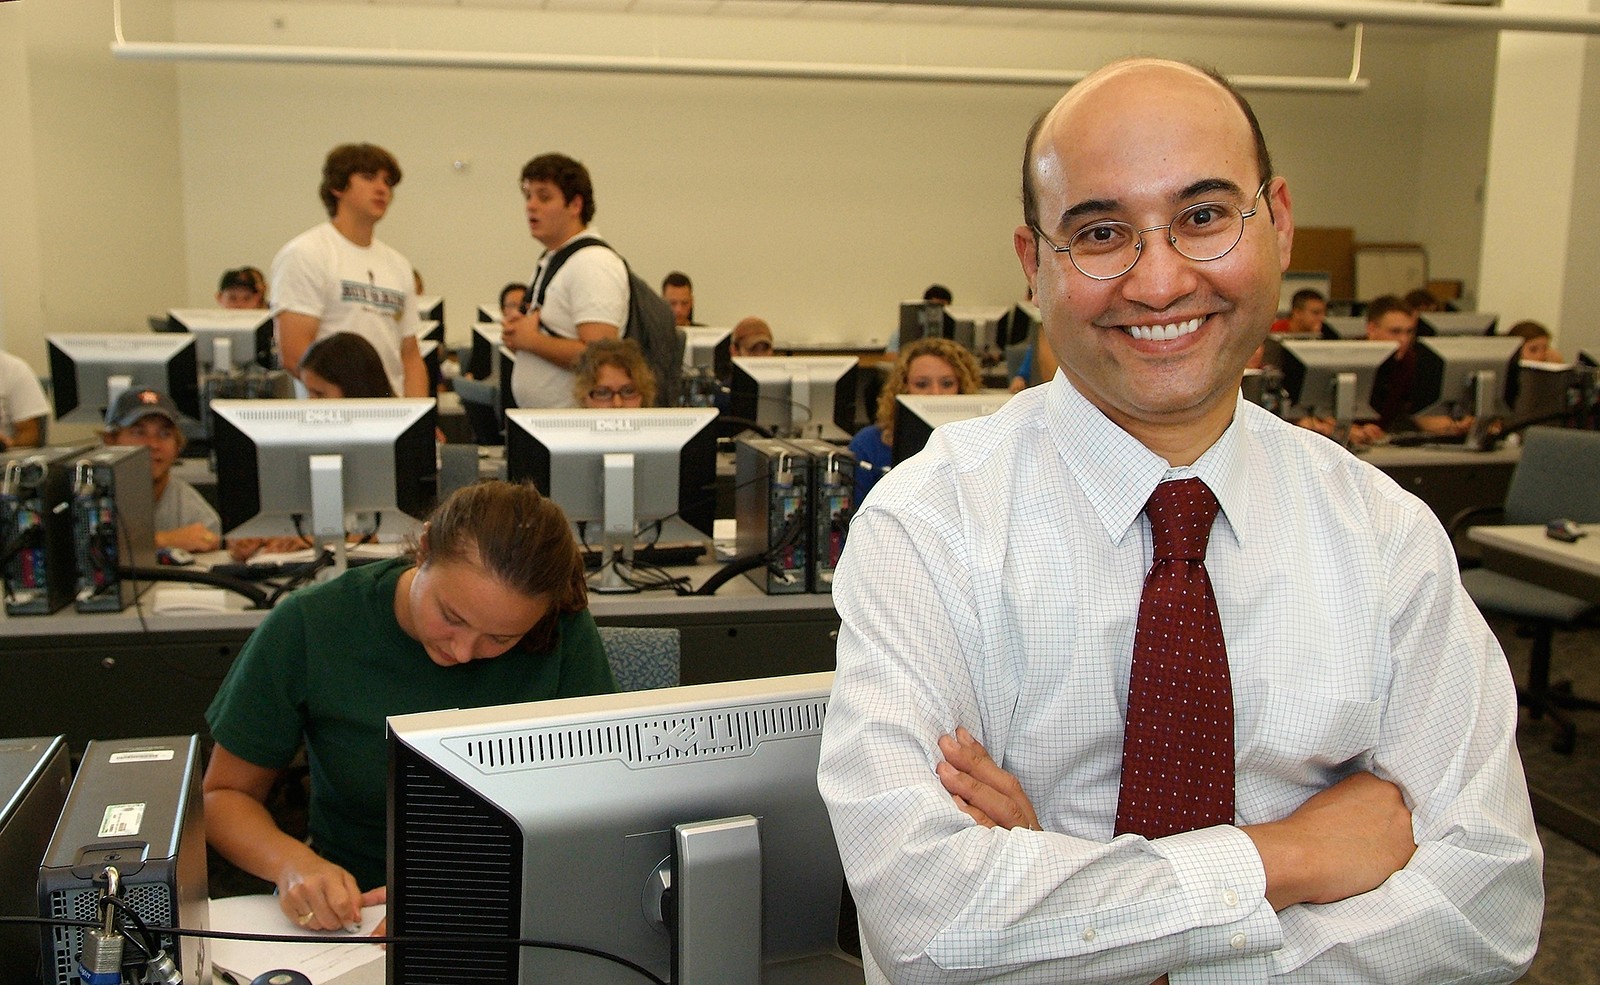 Dr. Mahmoud El-Halwagi stands with his arms crossed and smiles in front of a classroom with computers and students working and socializing. He's wearing a white button-down shirt and a red tie. 